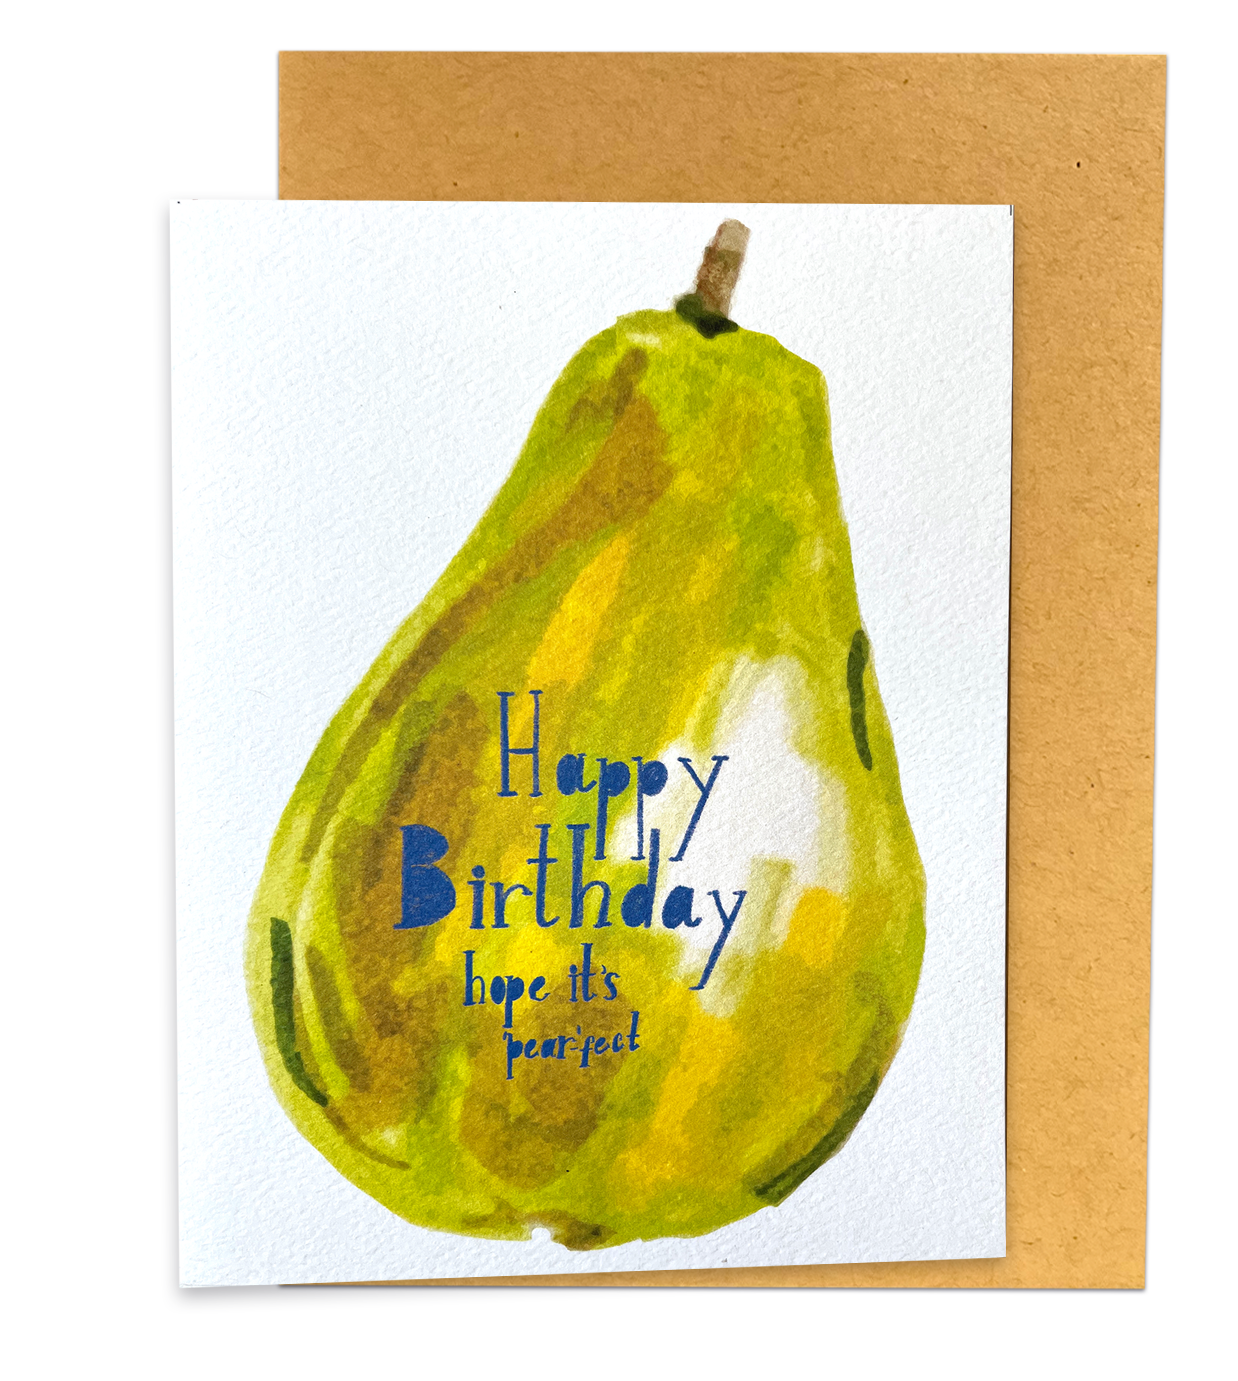 Birthday Wish that is almost PEAR-FECT